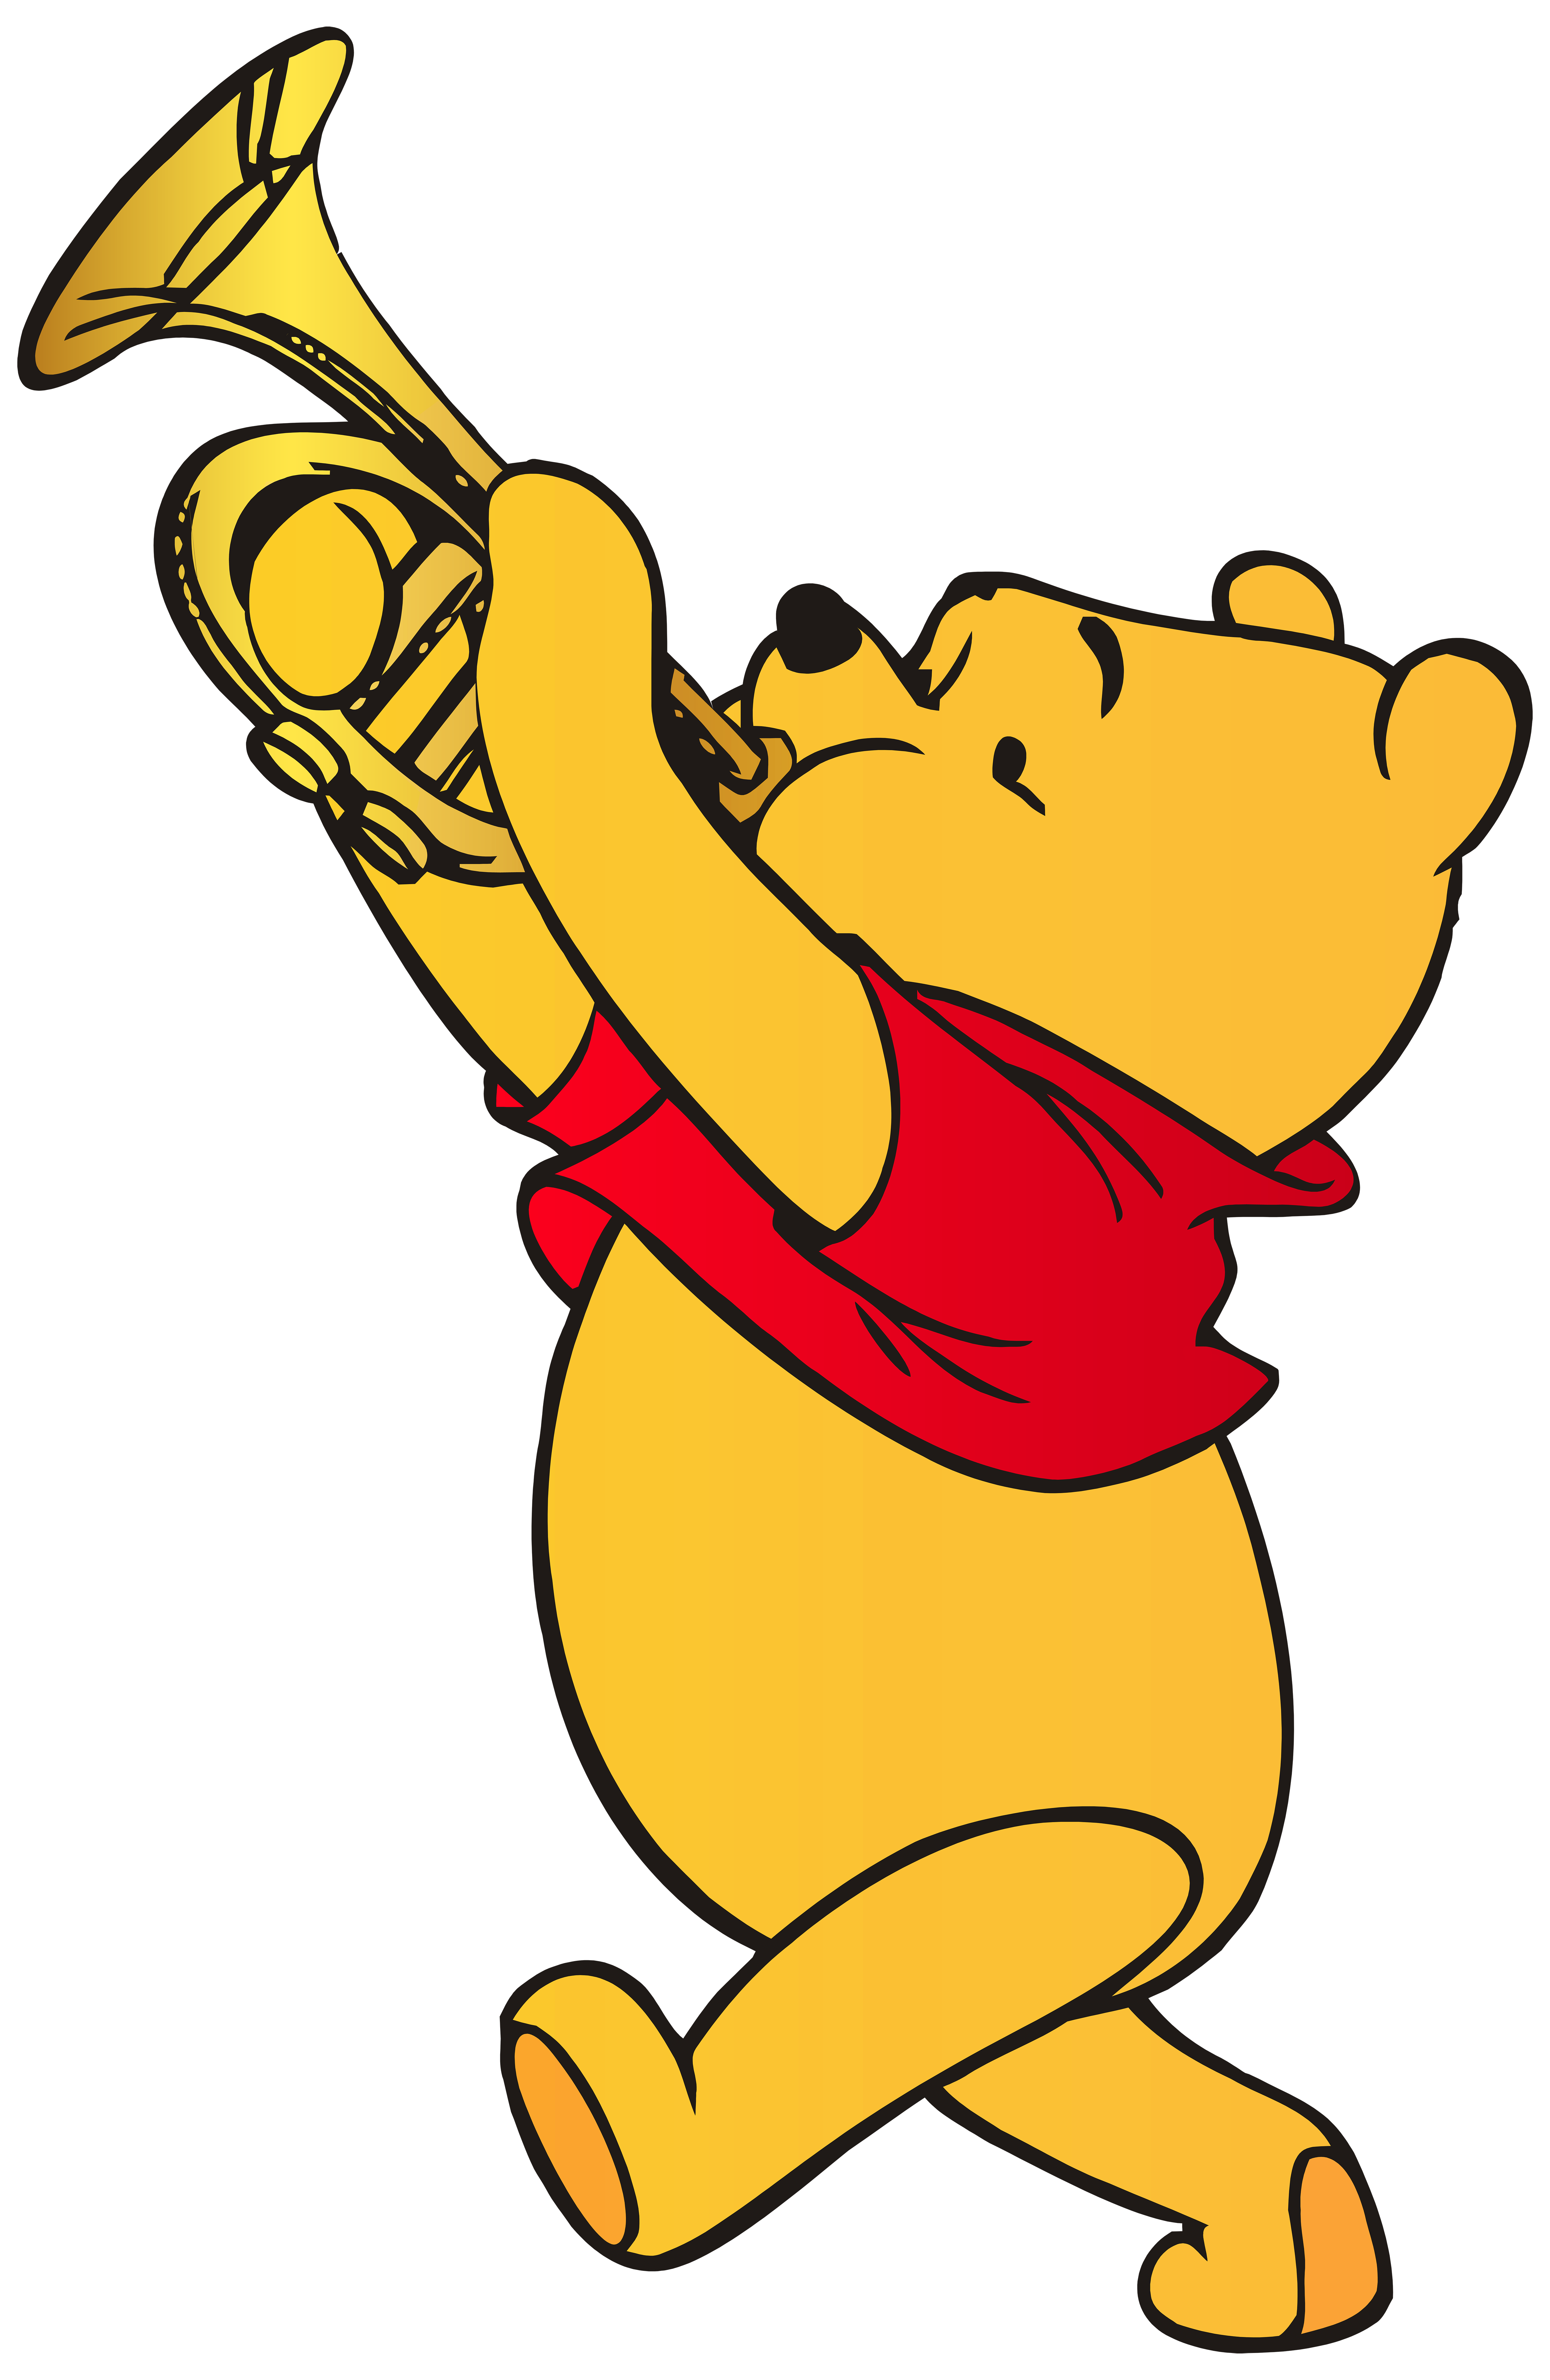 Winnie the pooh playing. Announcements clipart trumpet